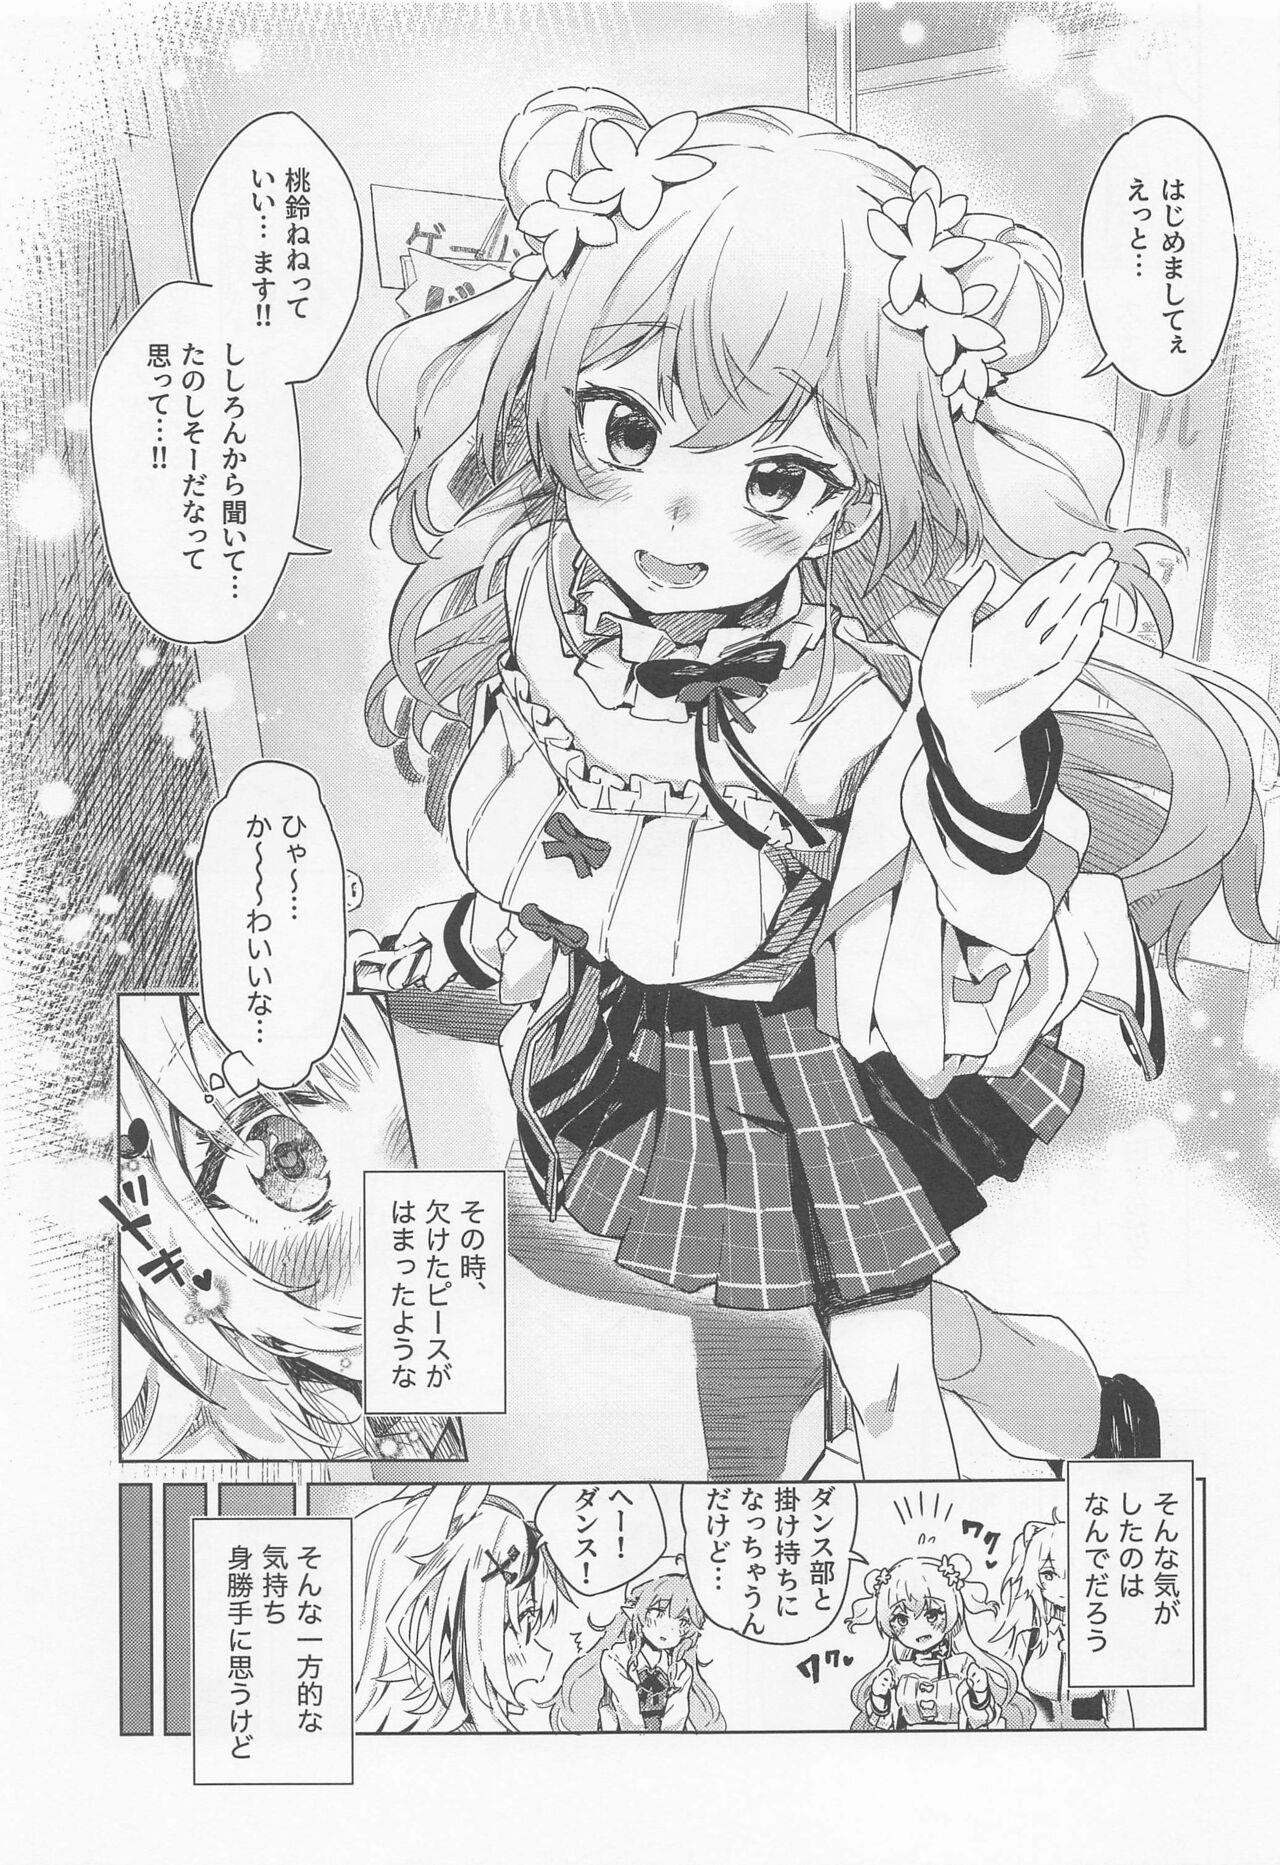 Hardcore Porno Fennec wa Iseijin no Yume o Miru ka - Does The Fennec Dream of The Lovely Visitor? - Hololive Cruising - Page 4